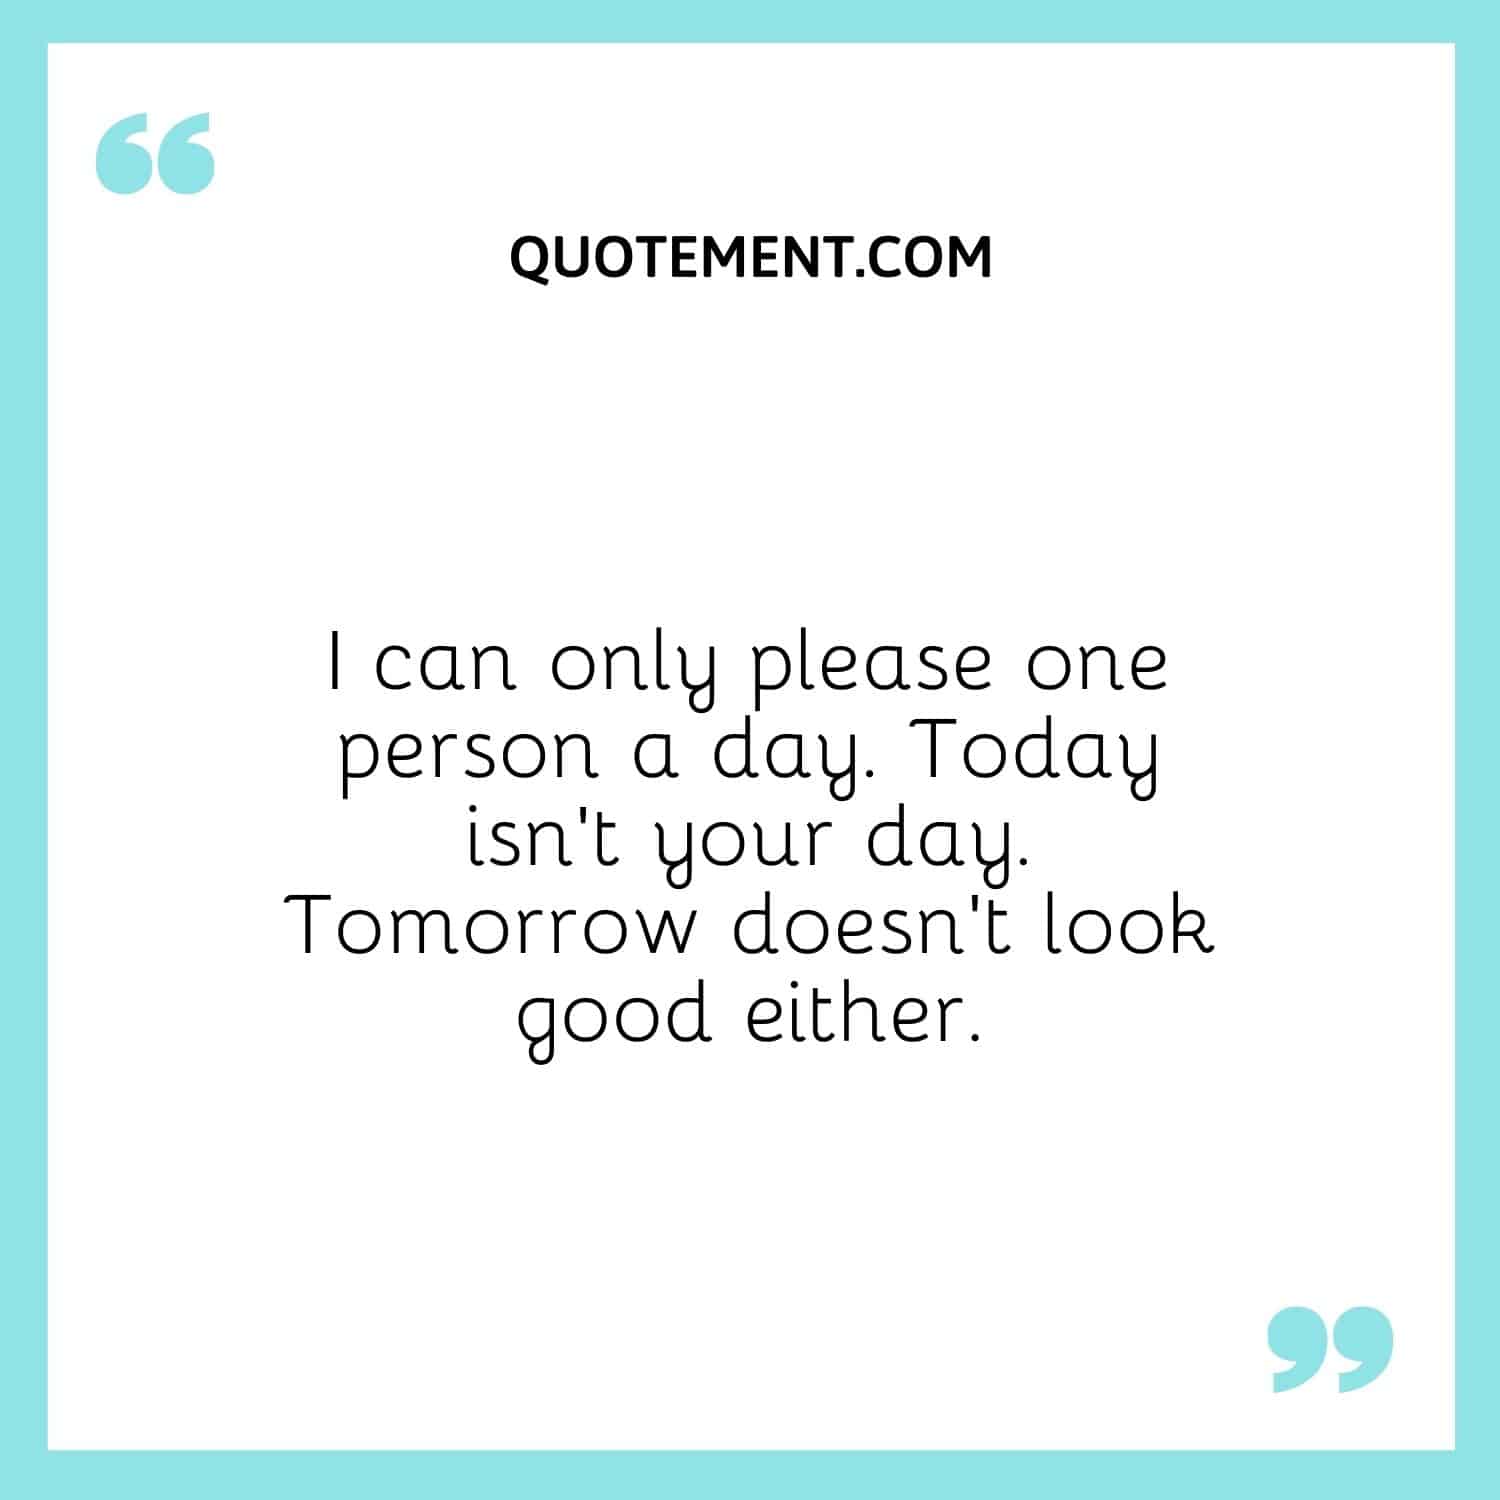 I can only please one person a day. Today isn’t your day. Tomorrow doesn’t look good either.